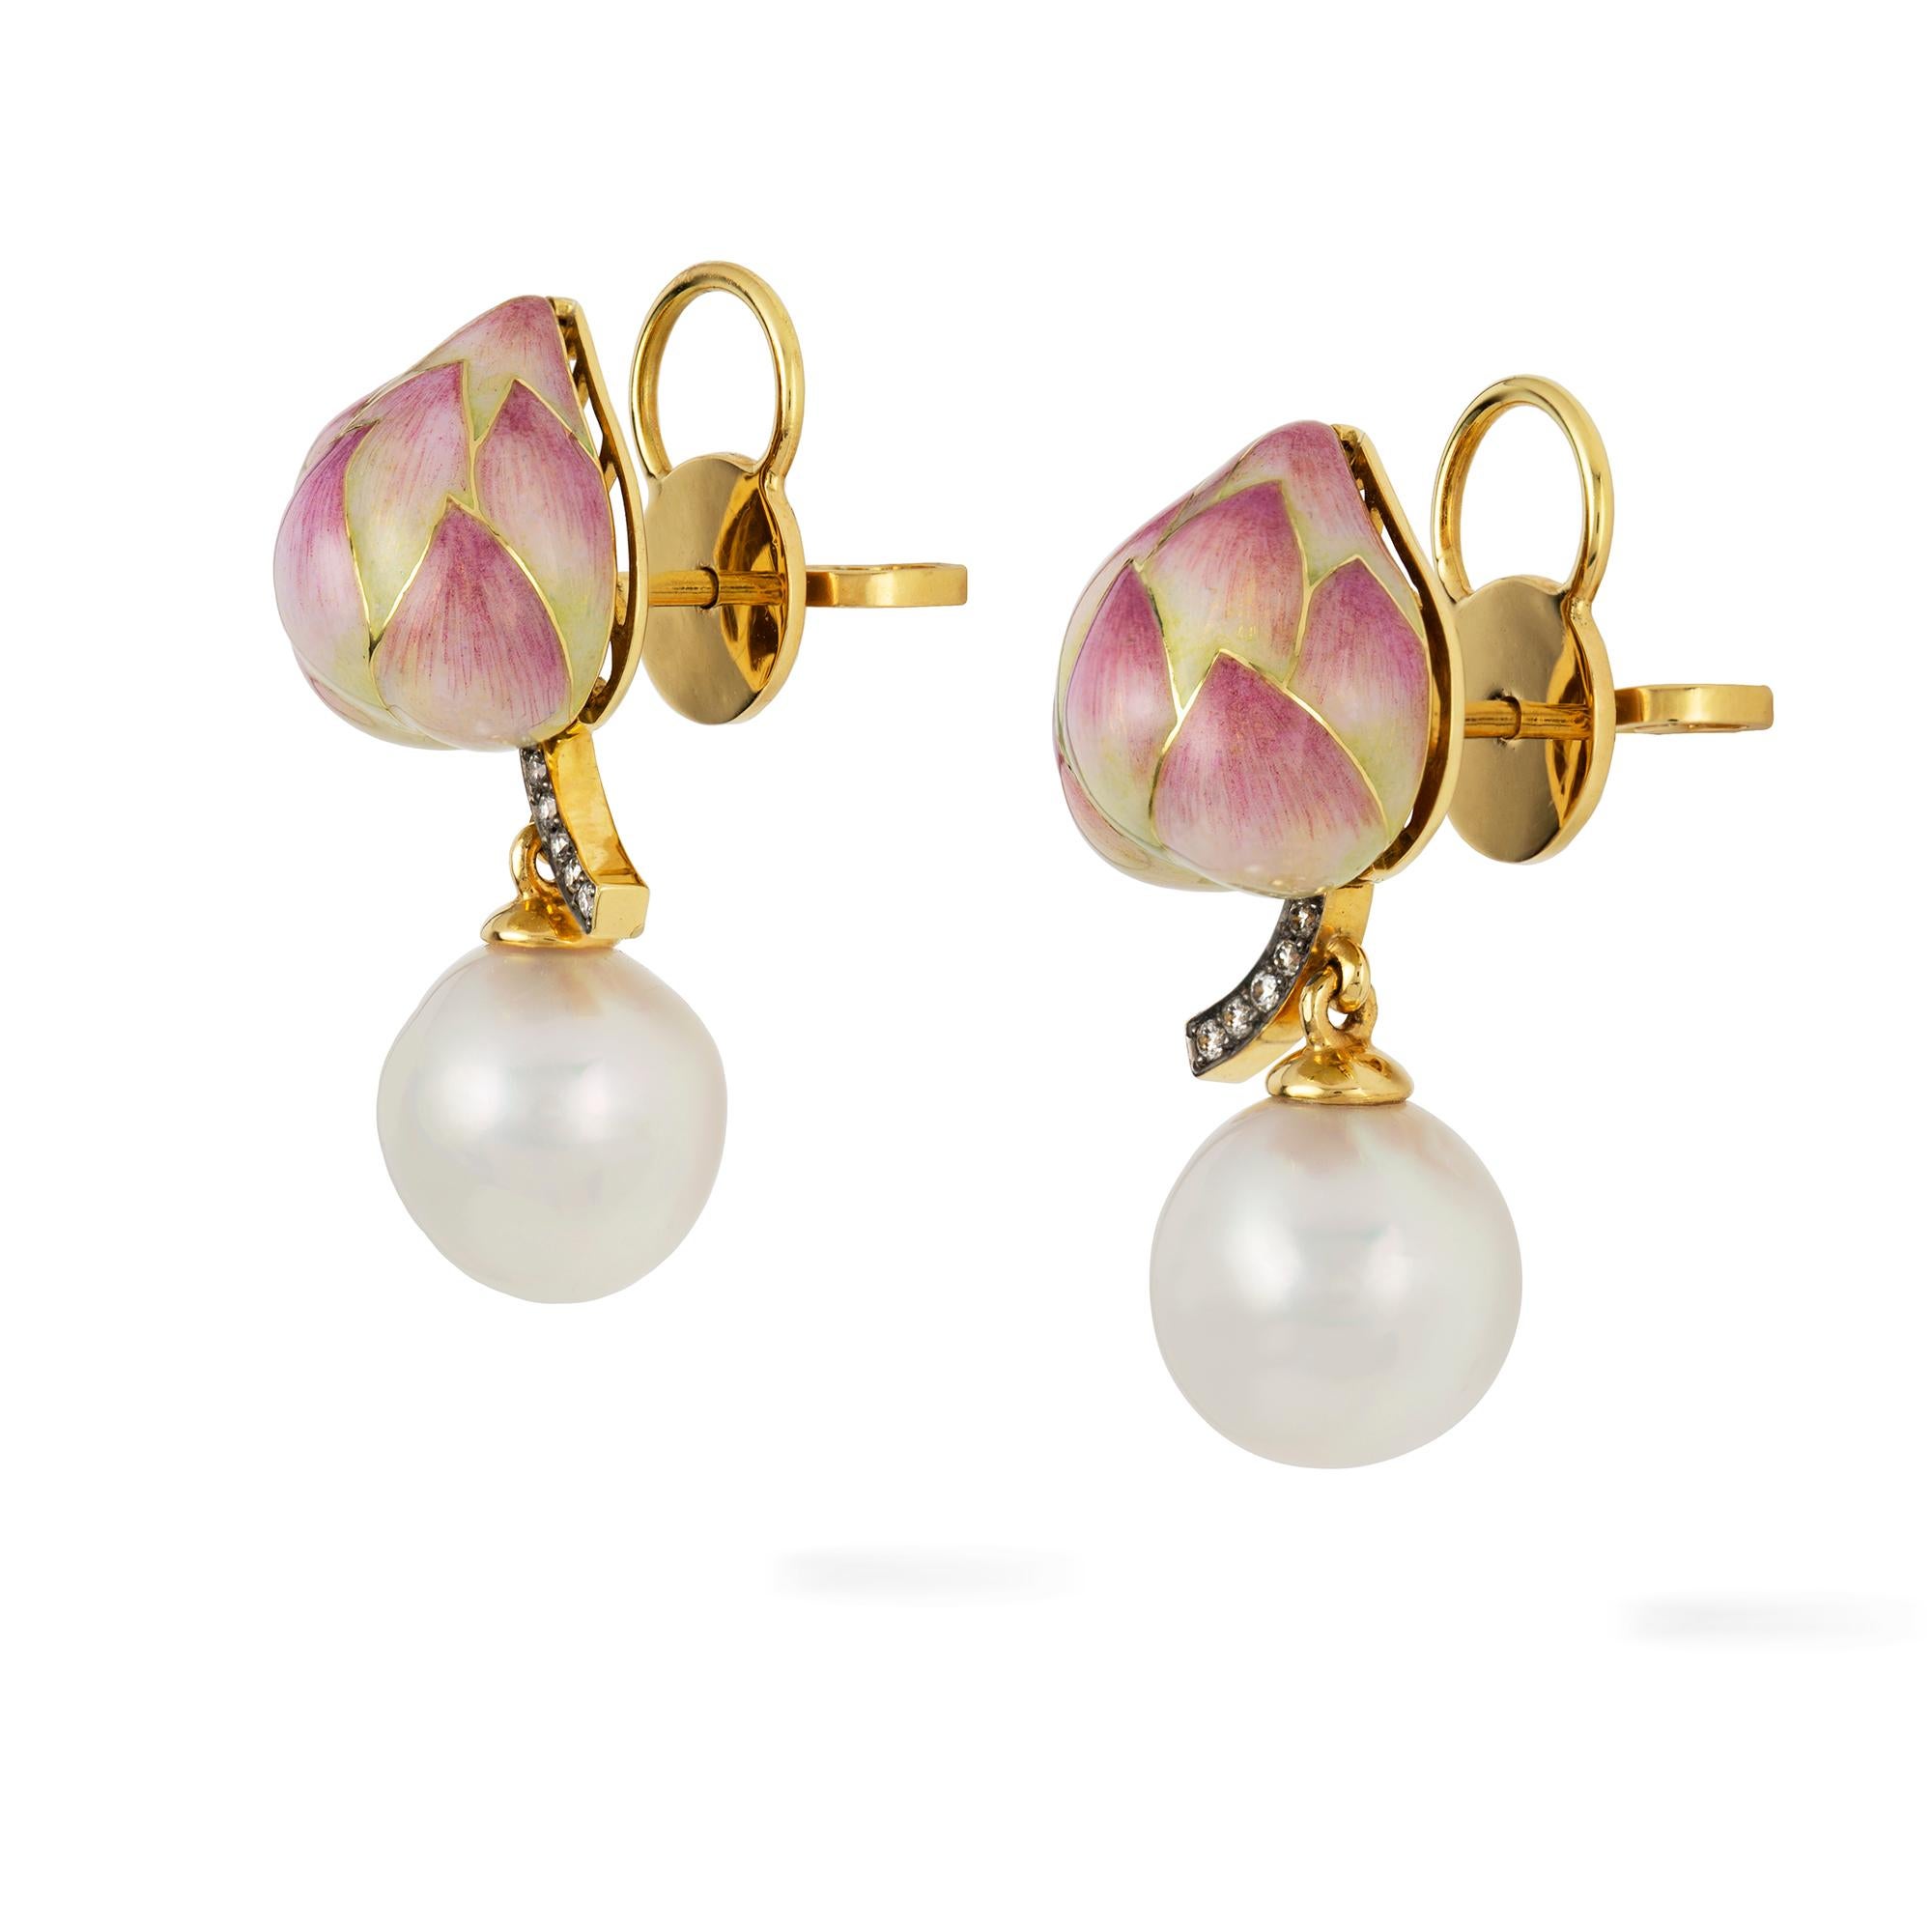 A pair of lotus earrings by Ilgiz F, each earring with a champlevé enamelled lotus bud, with diamond encrusted pedicel, suspending a saltwater cultured pearl, all in yellow gold mount with post and scroll fitting, hallmarked 18ct gold, London, made